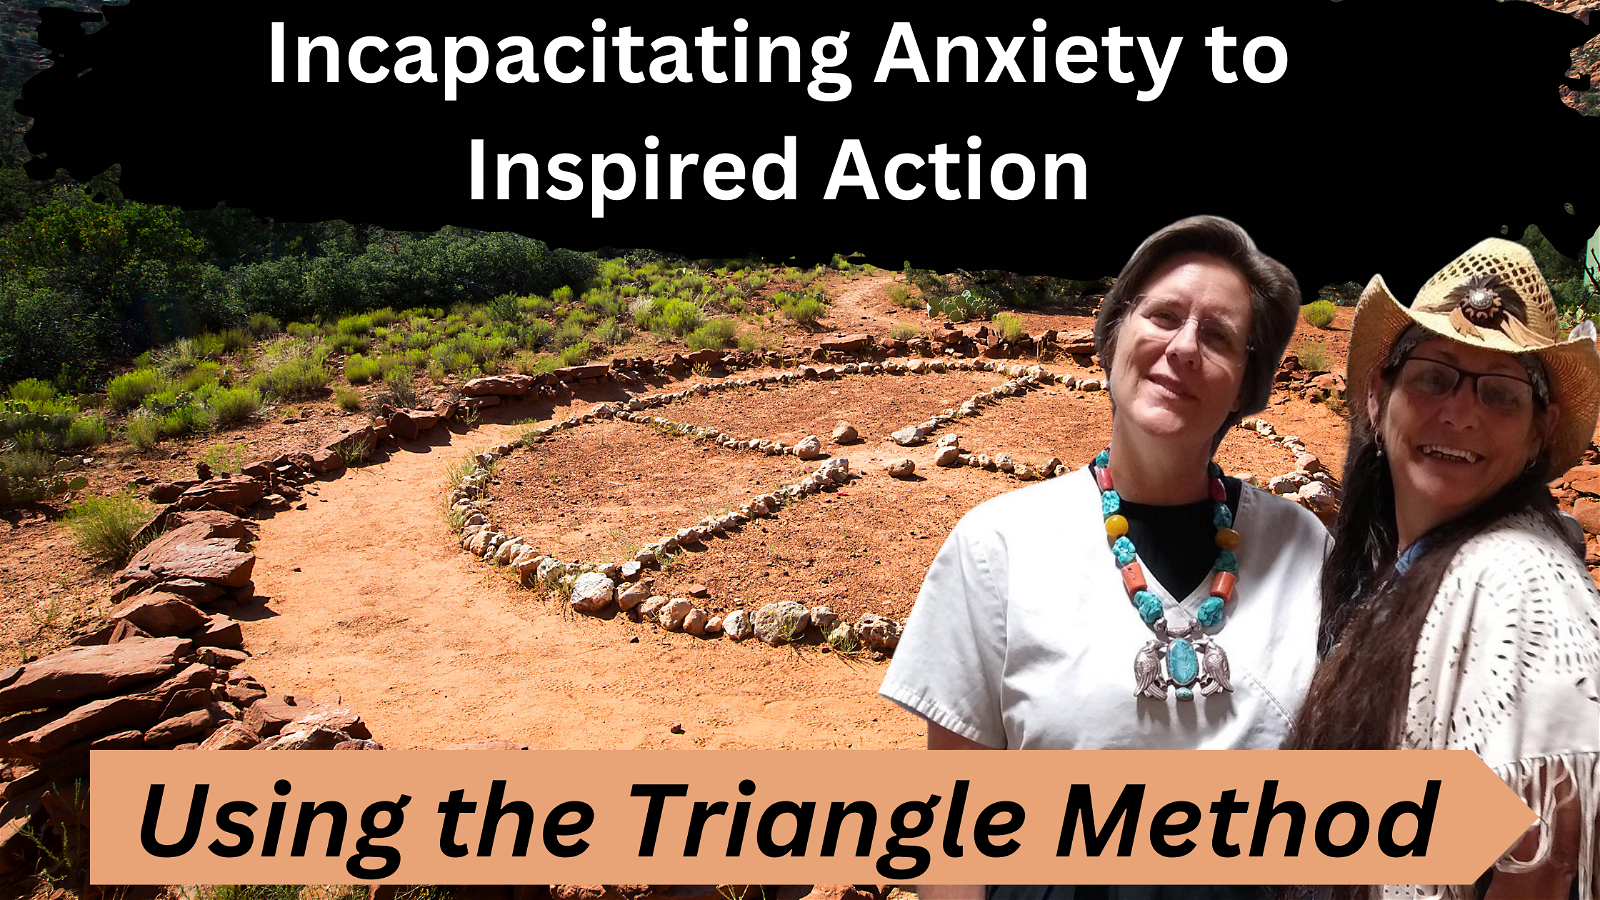 Workshop #3: Incapacitating Anxiety to Inspired Action